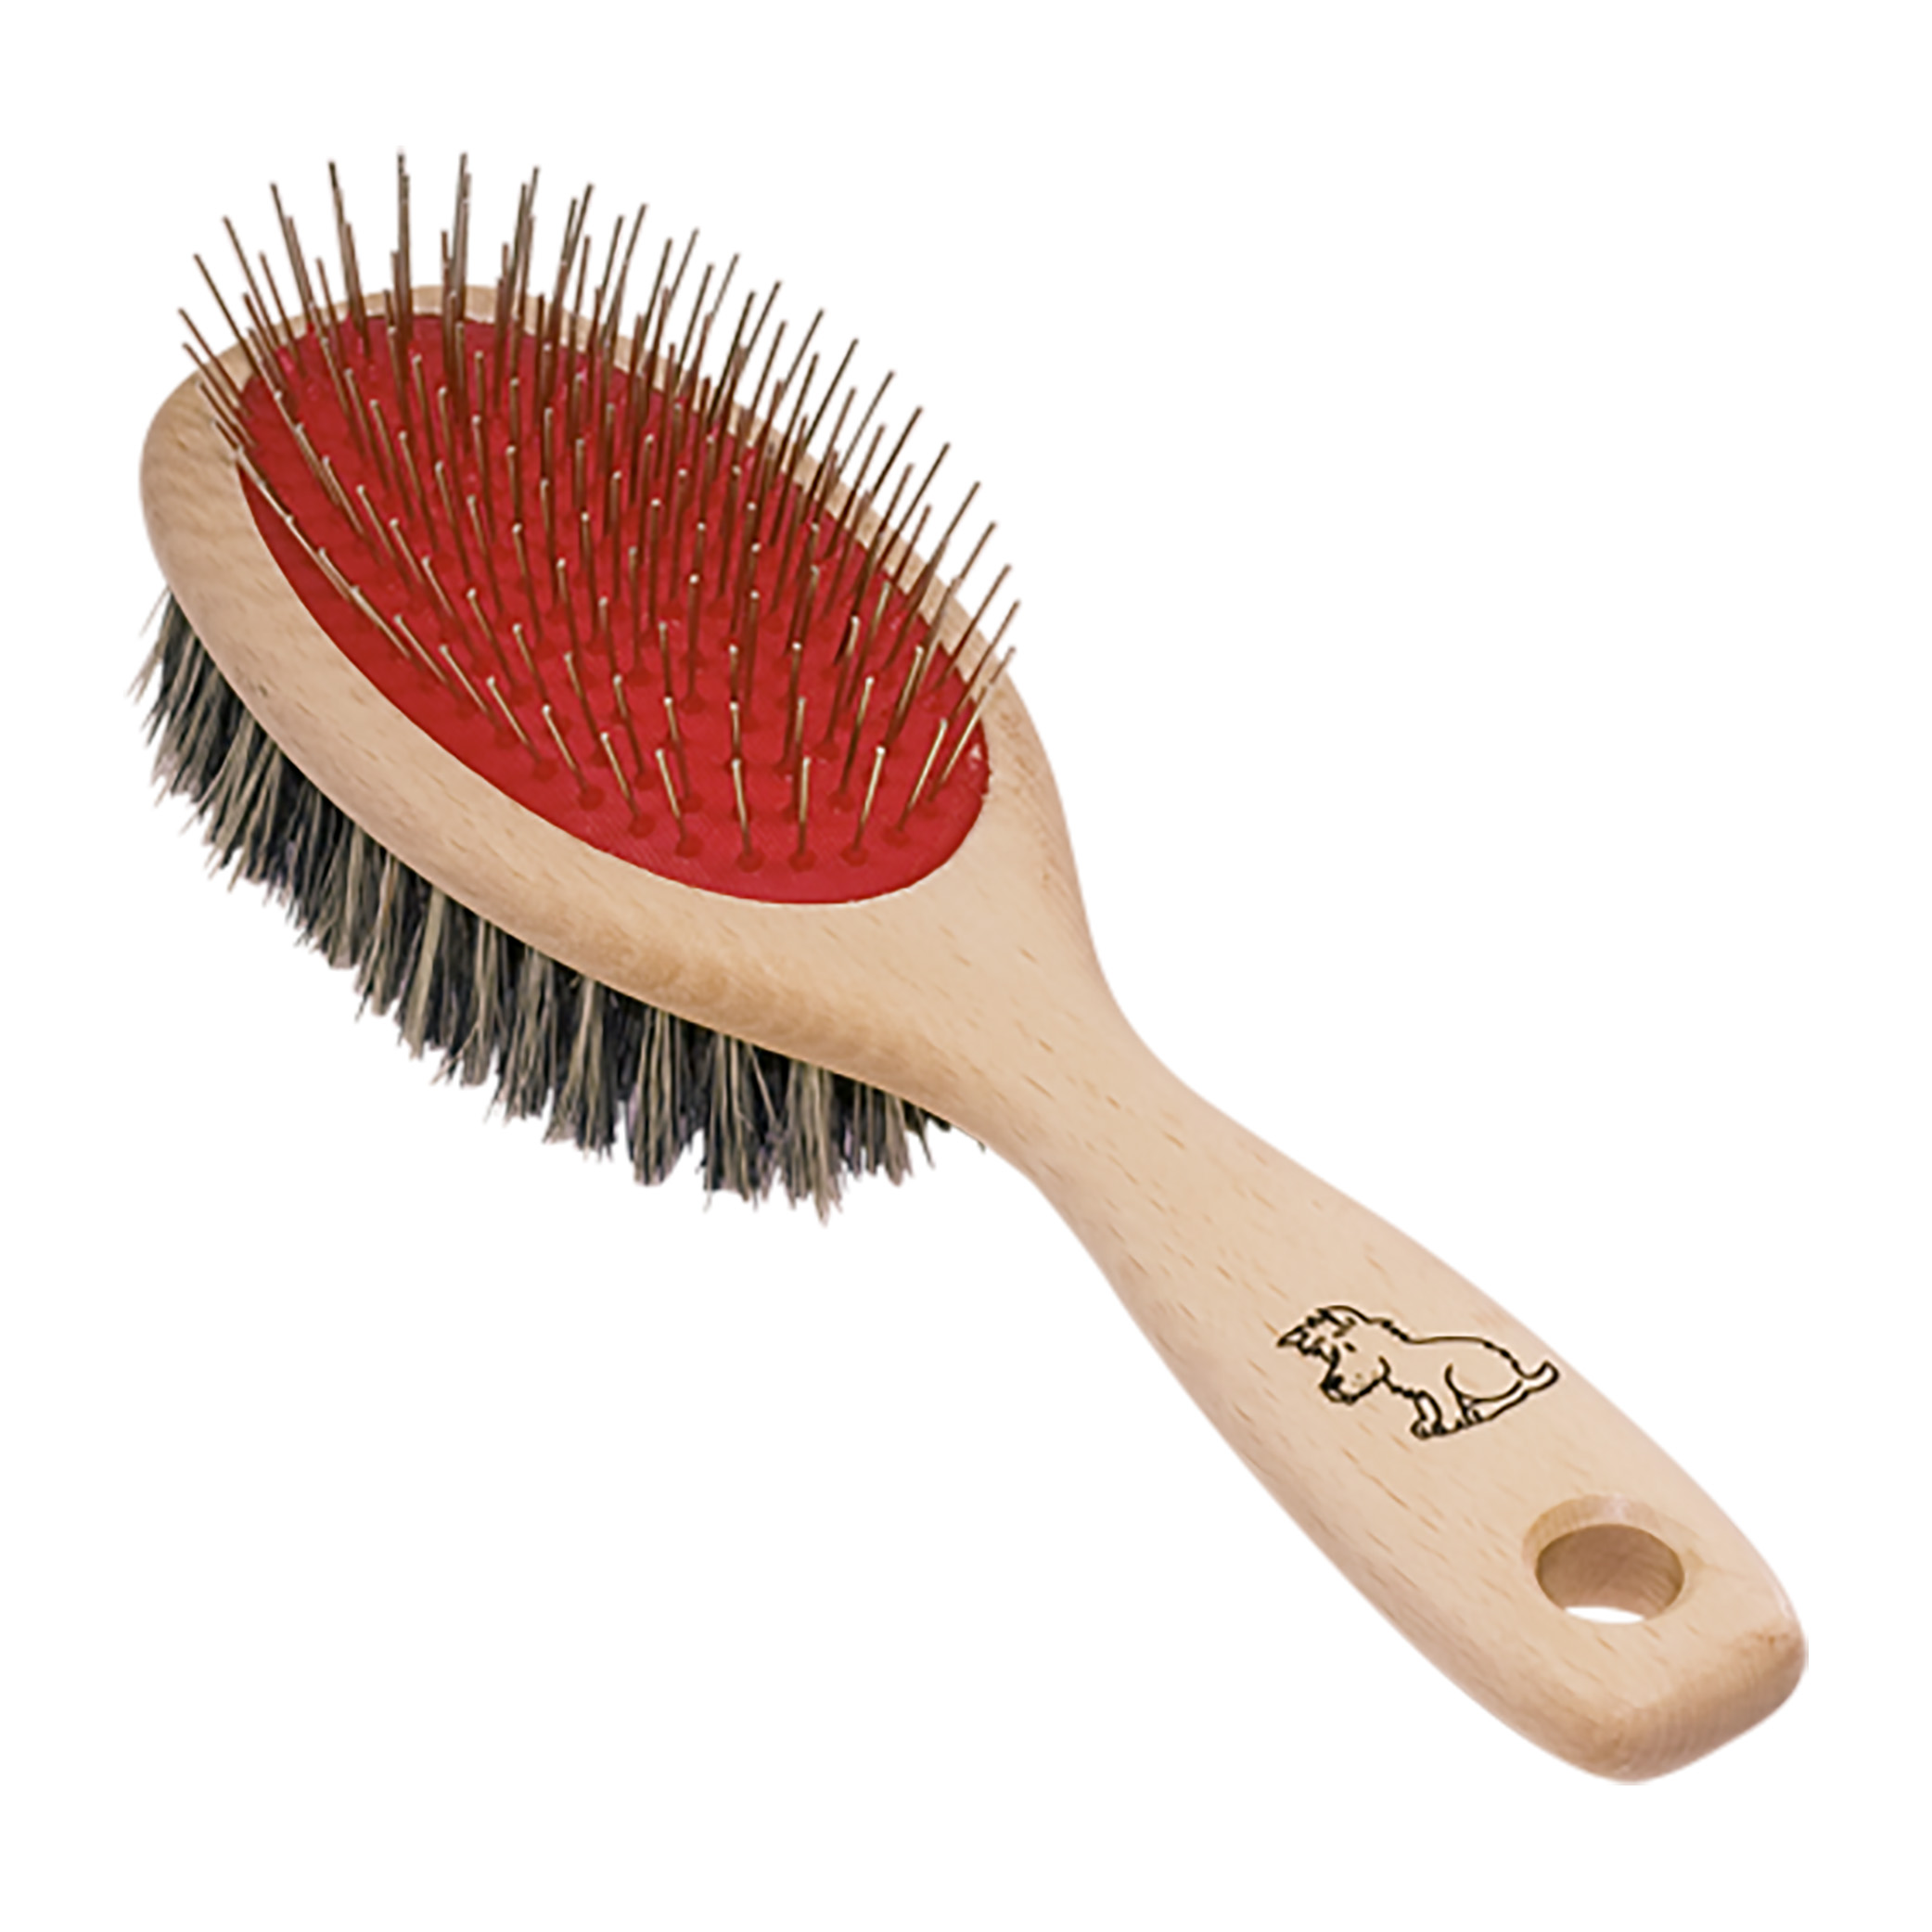 Redecker Wooden Dog Brush with Metal Pins and Tampico Fibre 